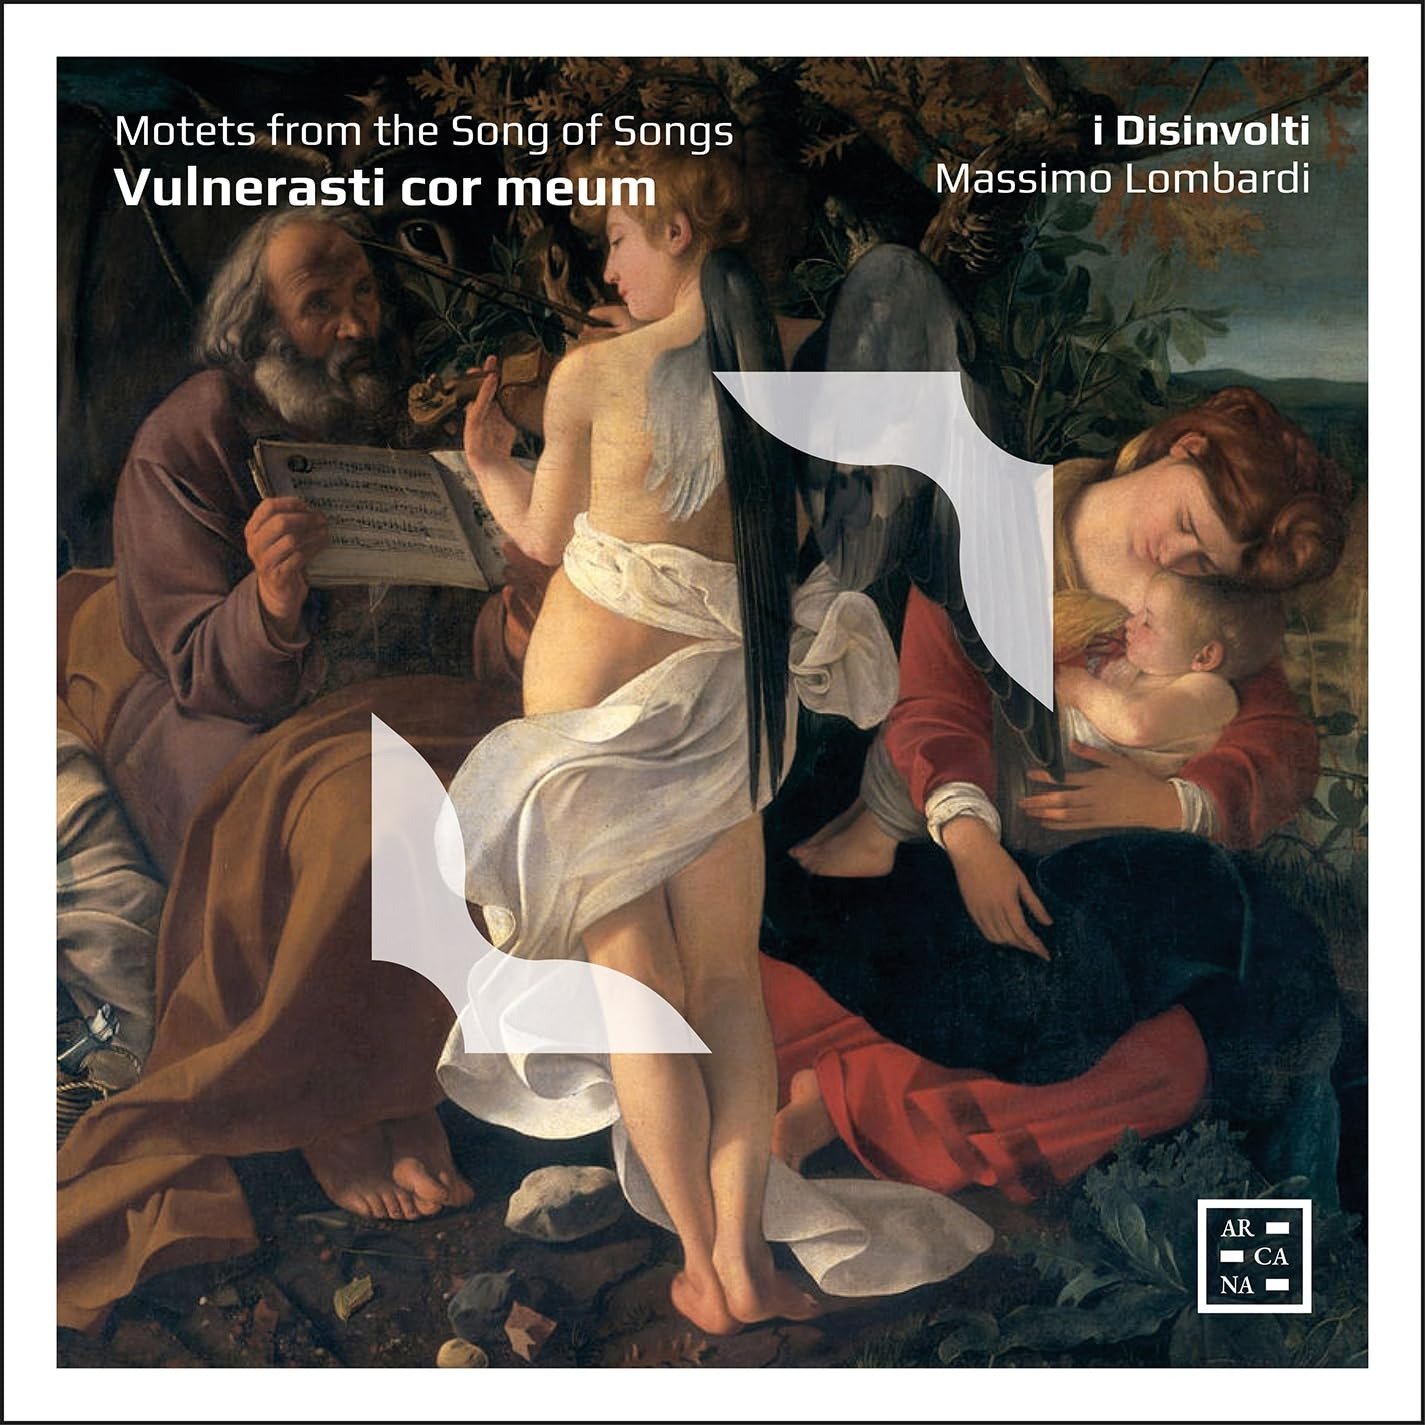 CD Shop - I DISINVOLTI VULNERASTI COR MEUM - MOTETS FROM THE SONG OF SONGS